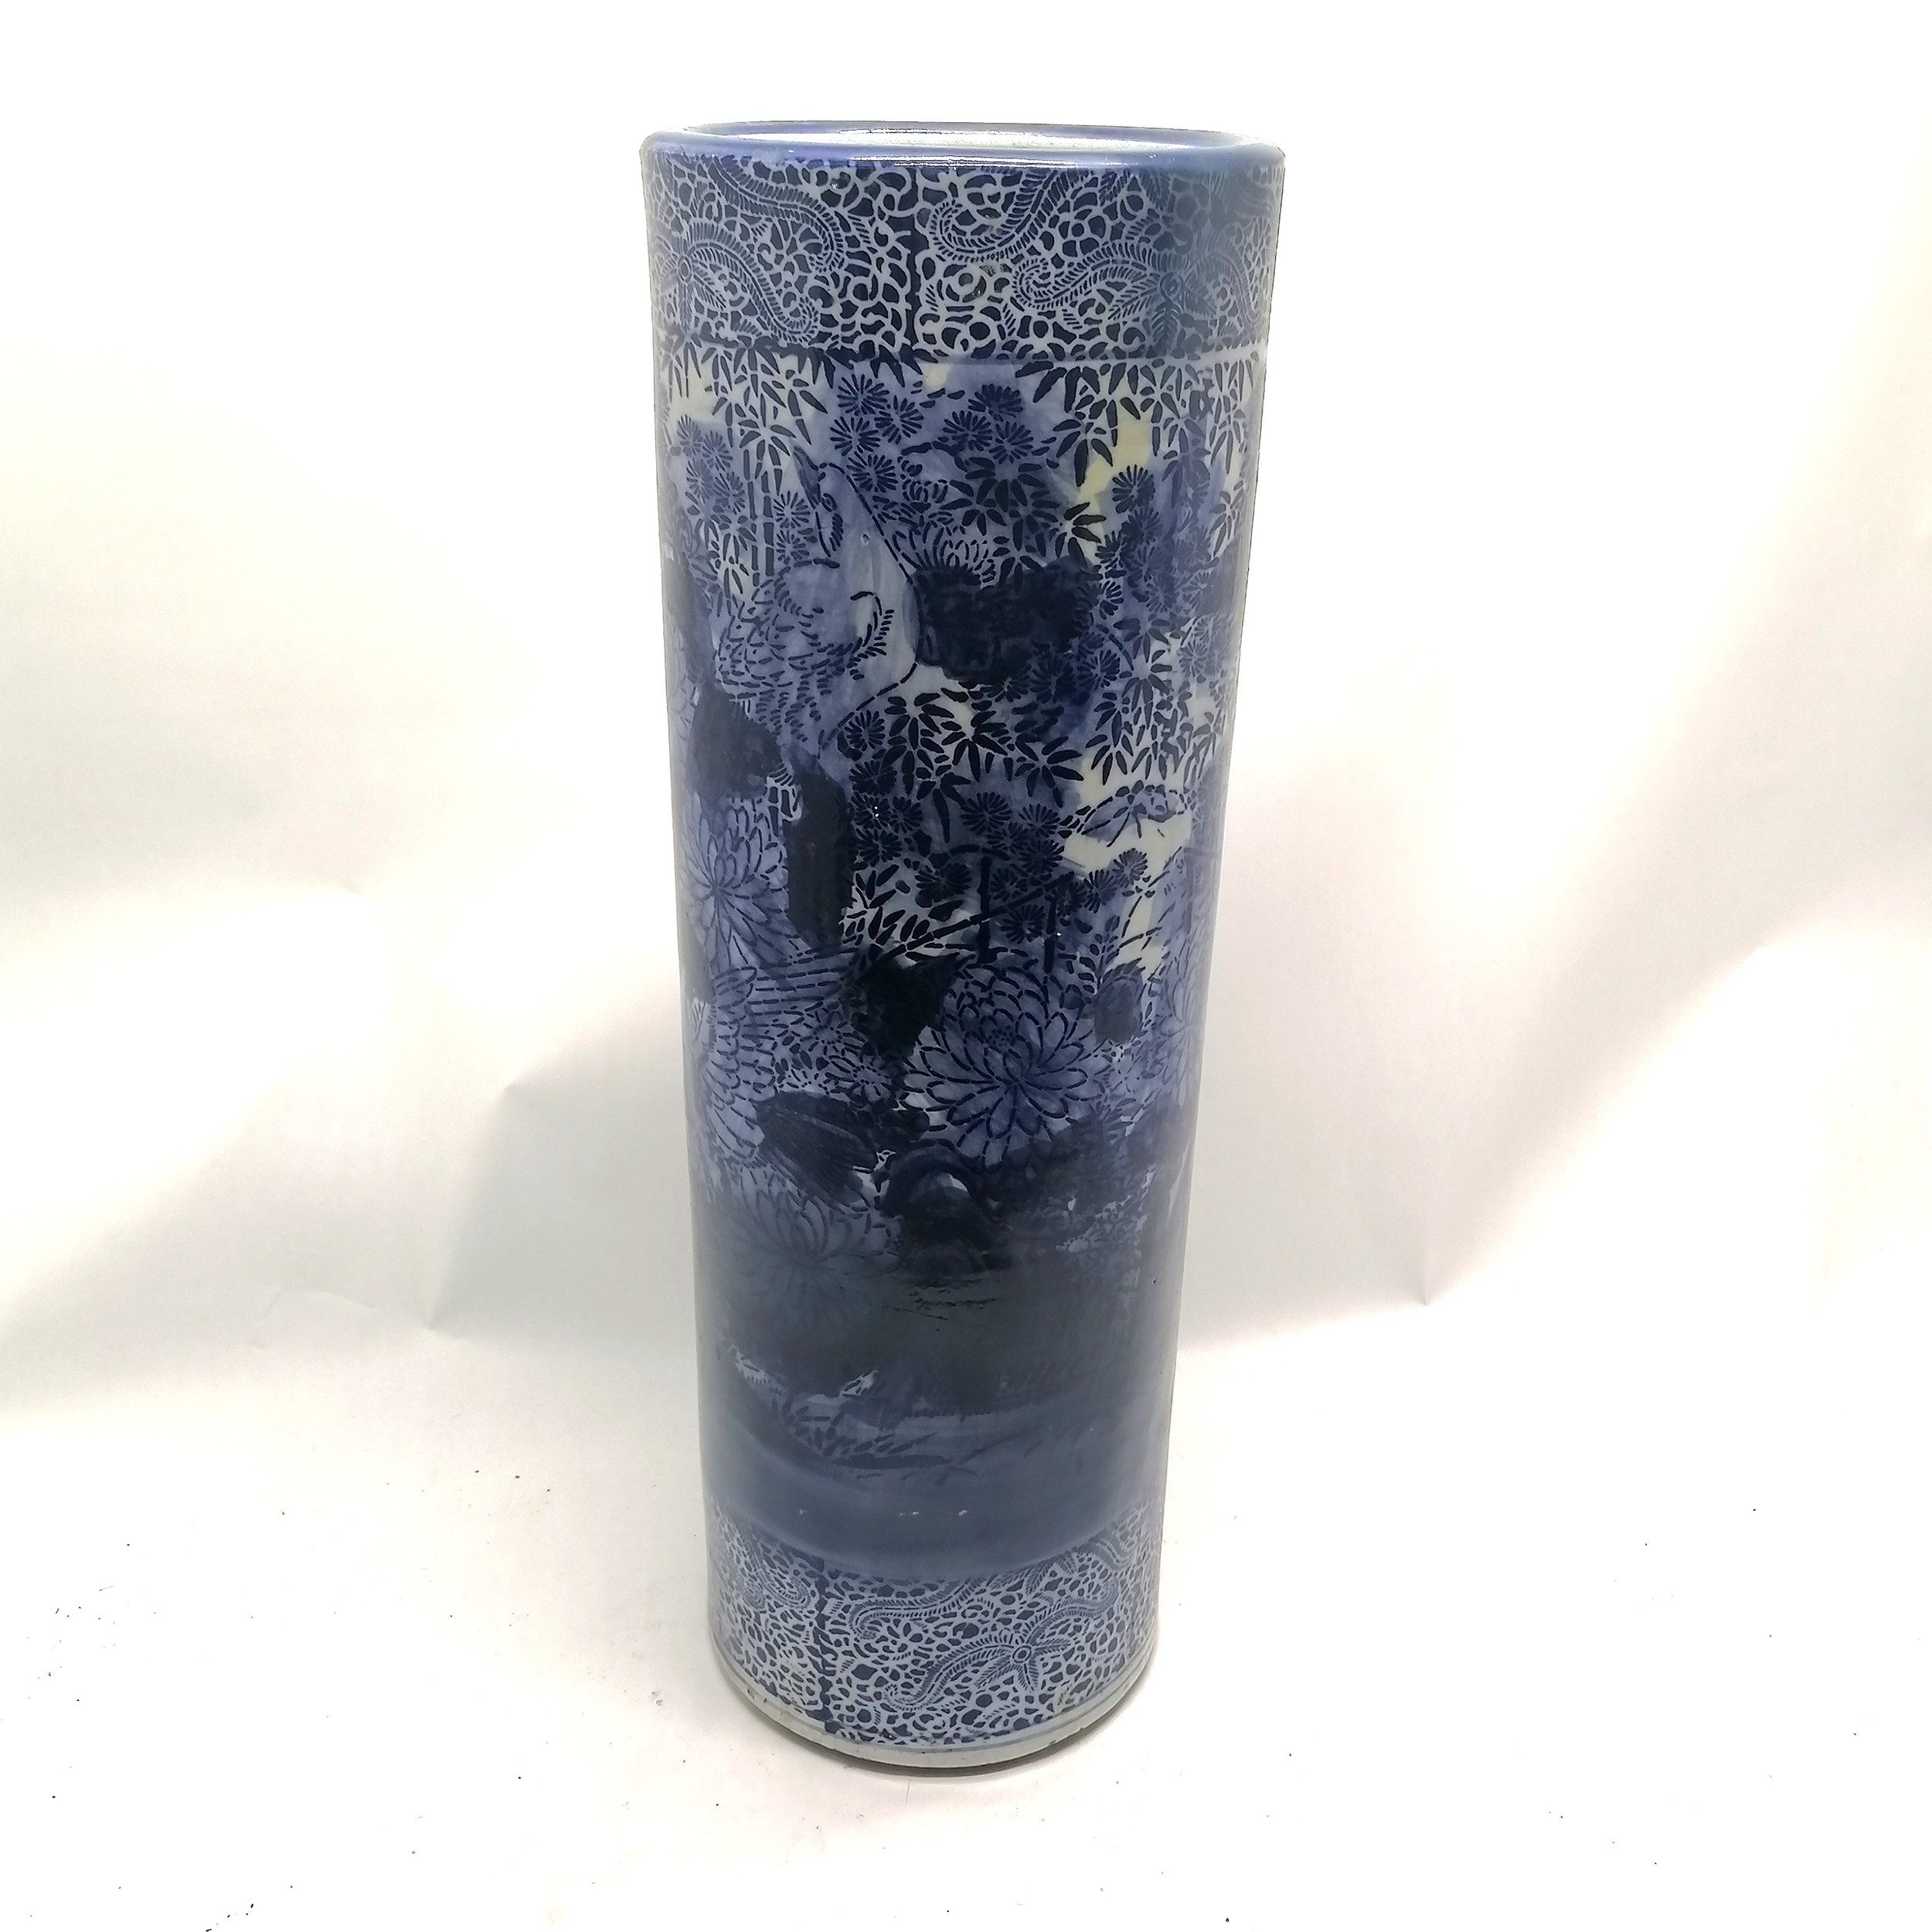 Oriental antique blue & white china stick stand with floral decoration - 62.5cm high x 22cm diameter